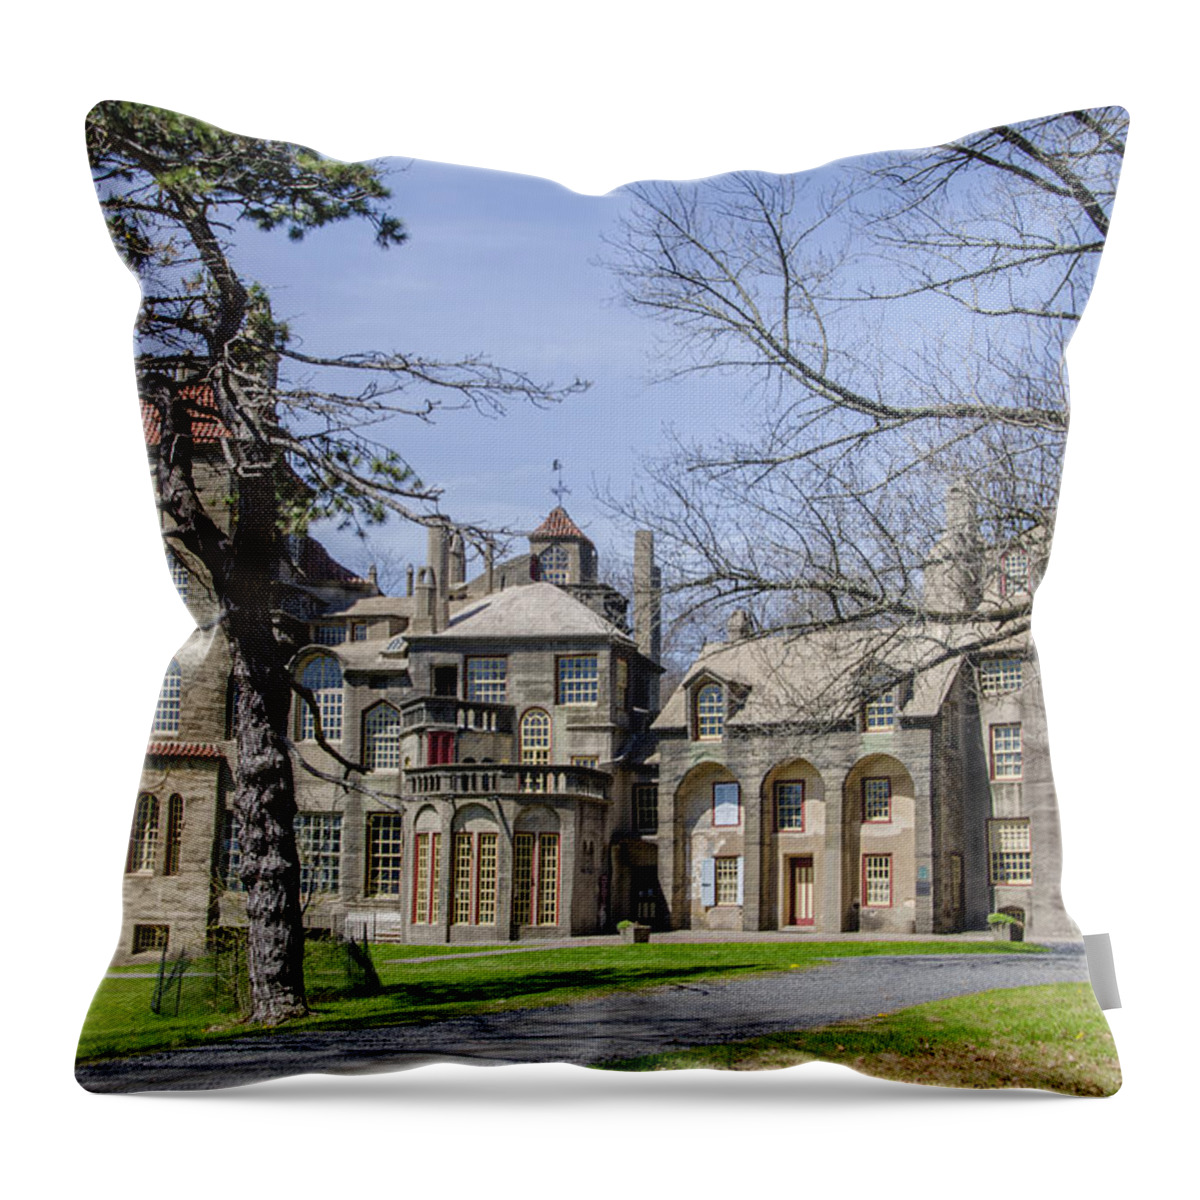 Fonthill Throw Pillow featuring the photograph Fonthill Castle - Doylestown Bucks County Pa by Bill Cannon